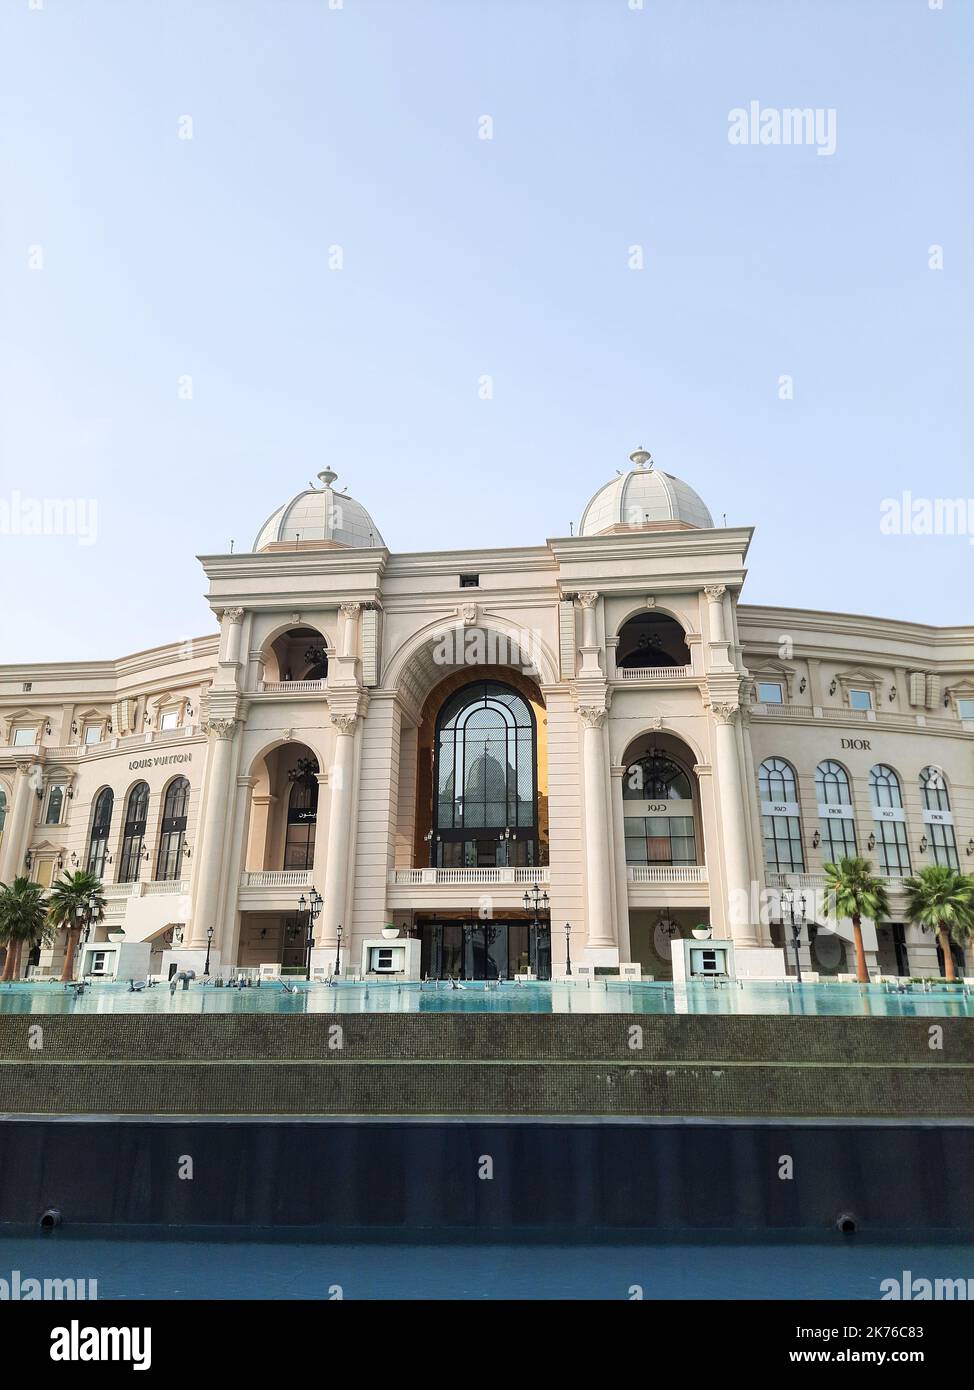 Louis vuitton place vendome hi-res stock photography and images - Alamy